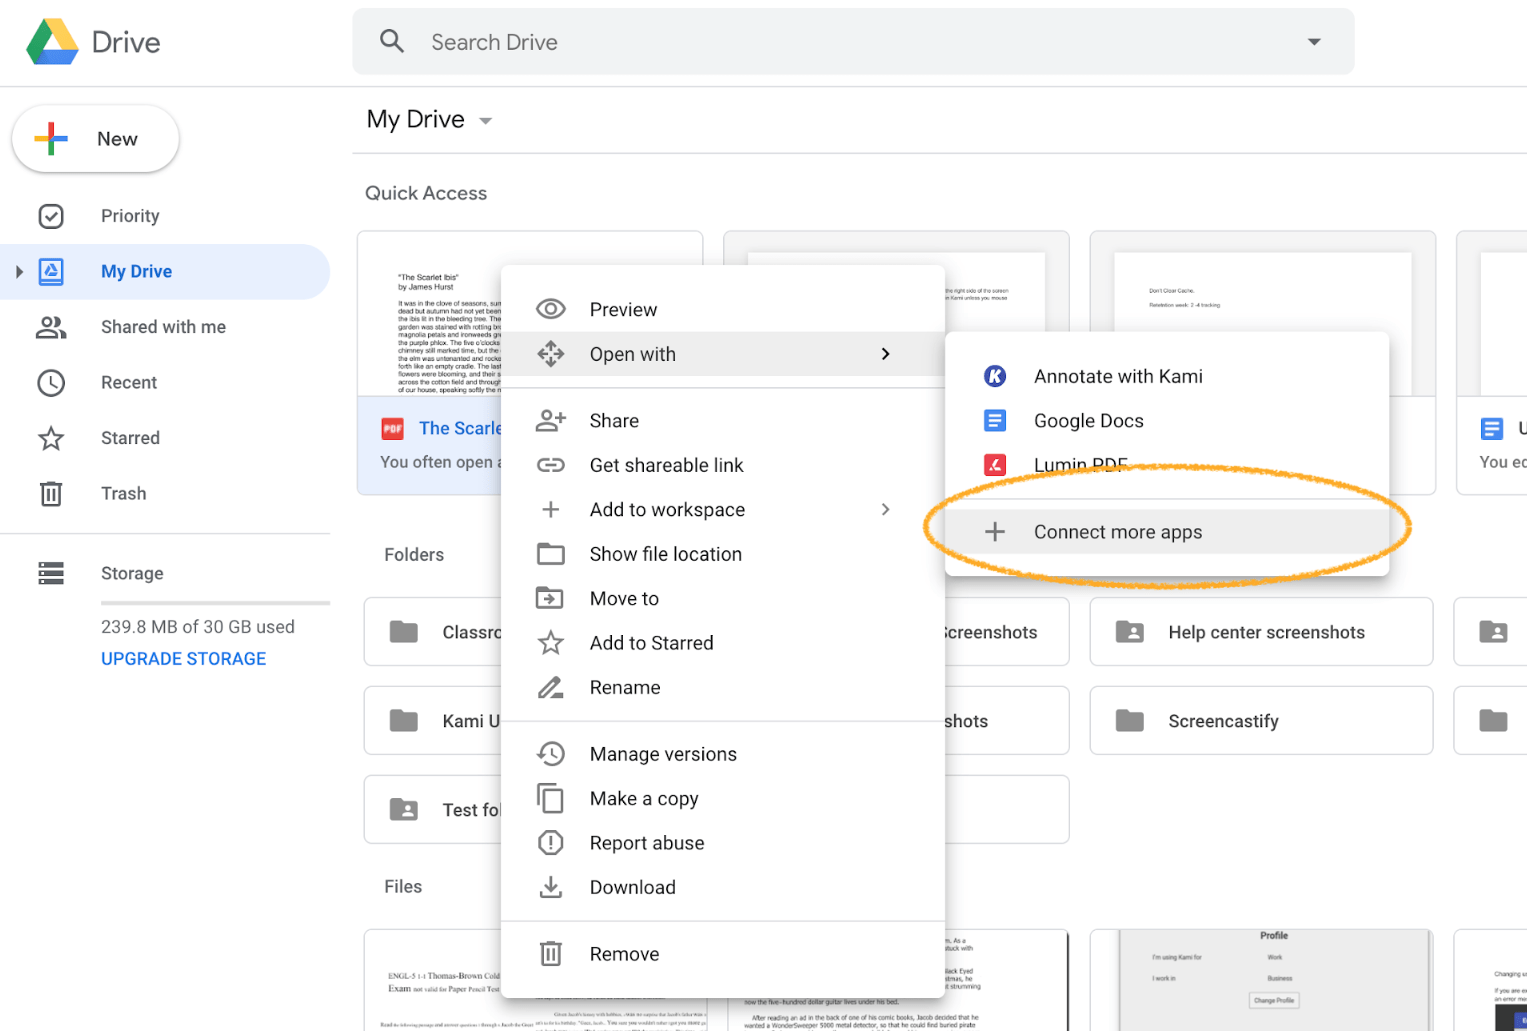 Connect more apps in Google Drive